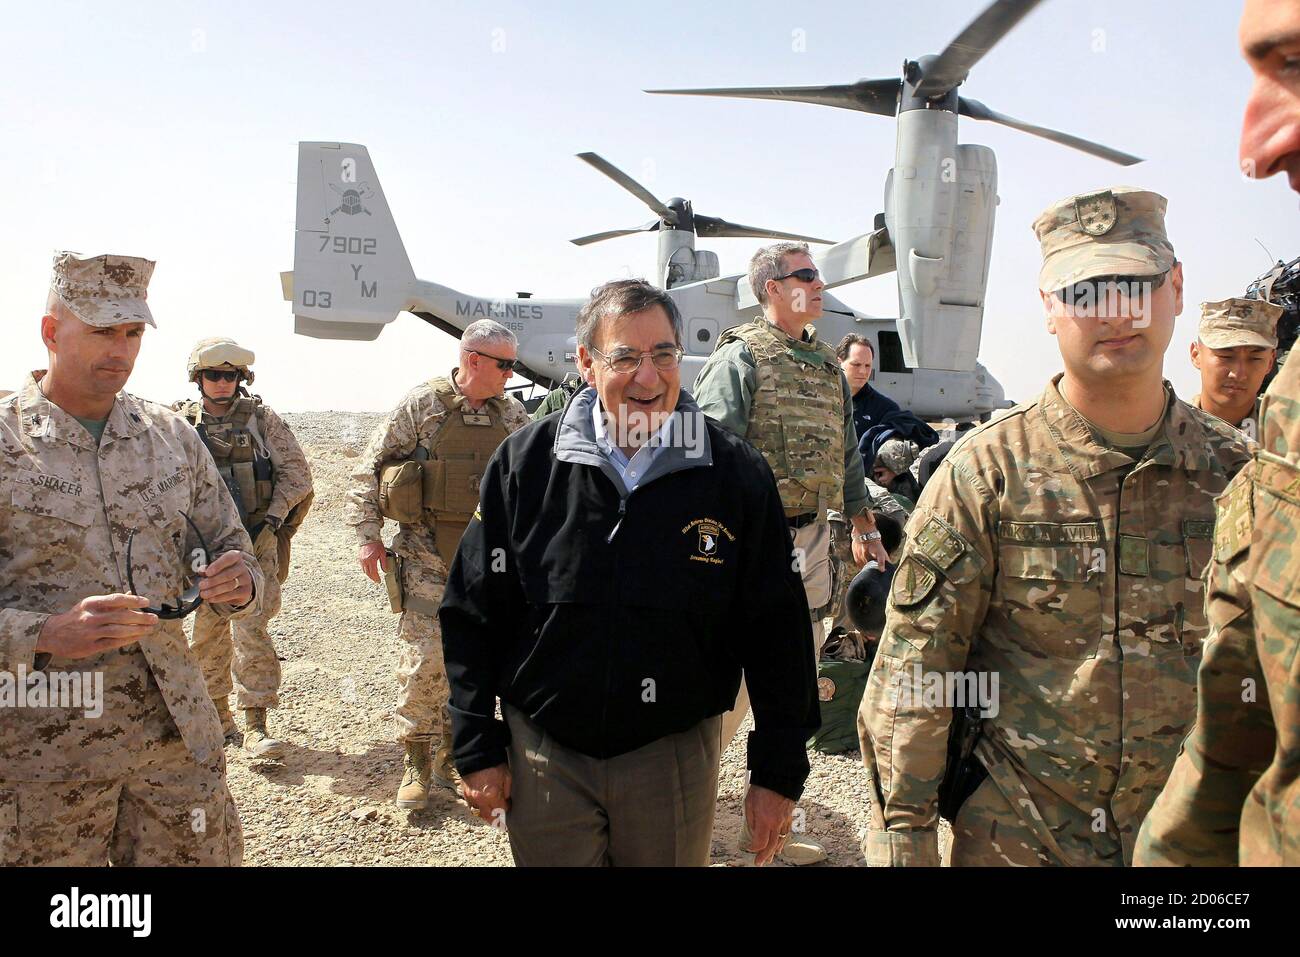 U.S. Defense Secretary Leon Panetta is greeted after arriving to greet troops at Forward Operating Base Shukvani, Afghanistan March 14, 2012. Panetta told troops in Afghanistan on Wednesday that the massacre of 16 Afghan civilians by an American soldier should not deter them from their mission to secure the country ahead of a 2014 NATO withdrawal deadline.  REUTERS/Scott Olson/Pool  (AFGHANISTAN - Tags: POLITICS MILITARY) Stock Photo